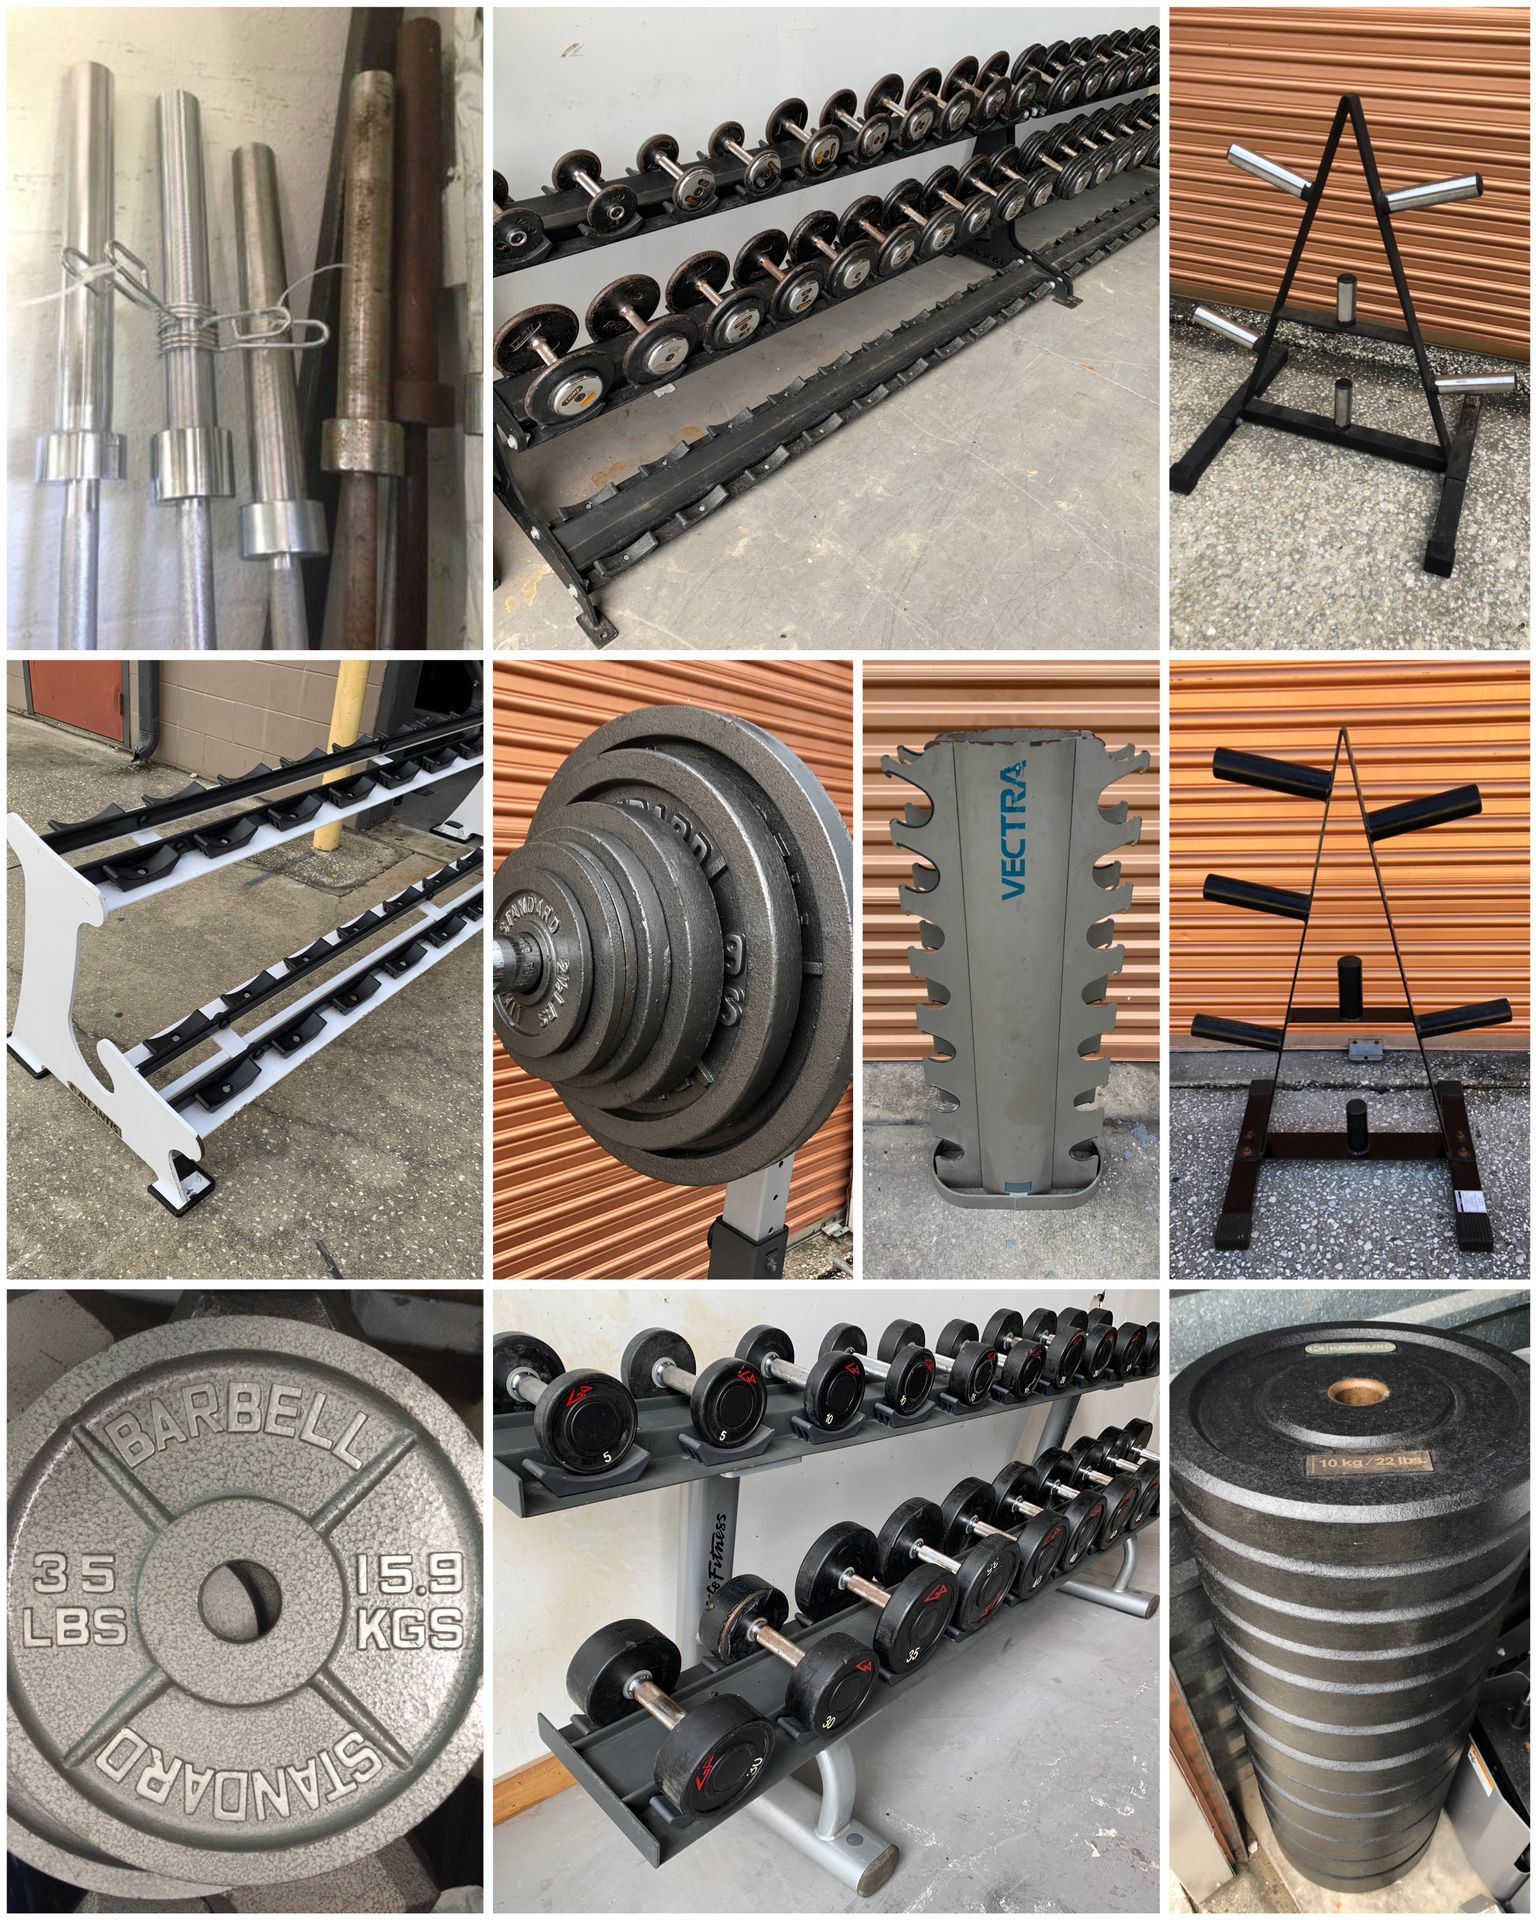 Dumbbells, Racks, Weight Trees, Barbells, Bumpers, Adjustable Dumbbells, Olympic Weight Plates